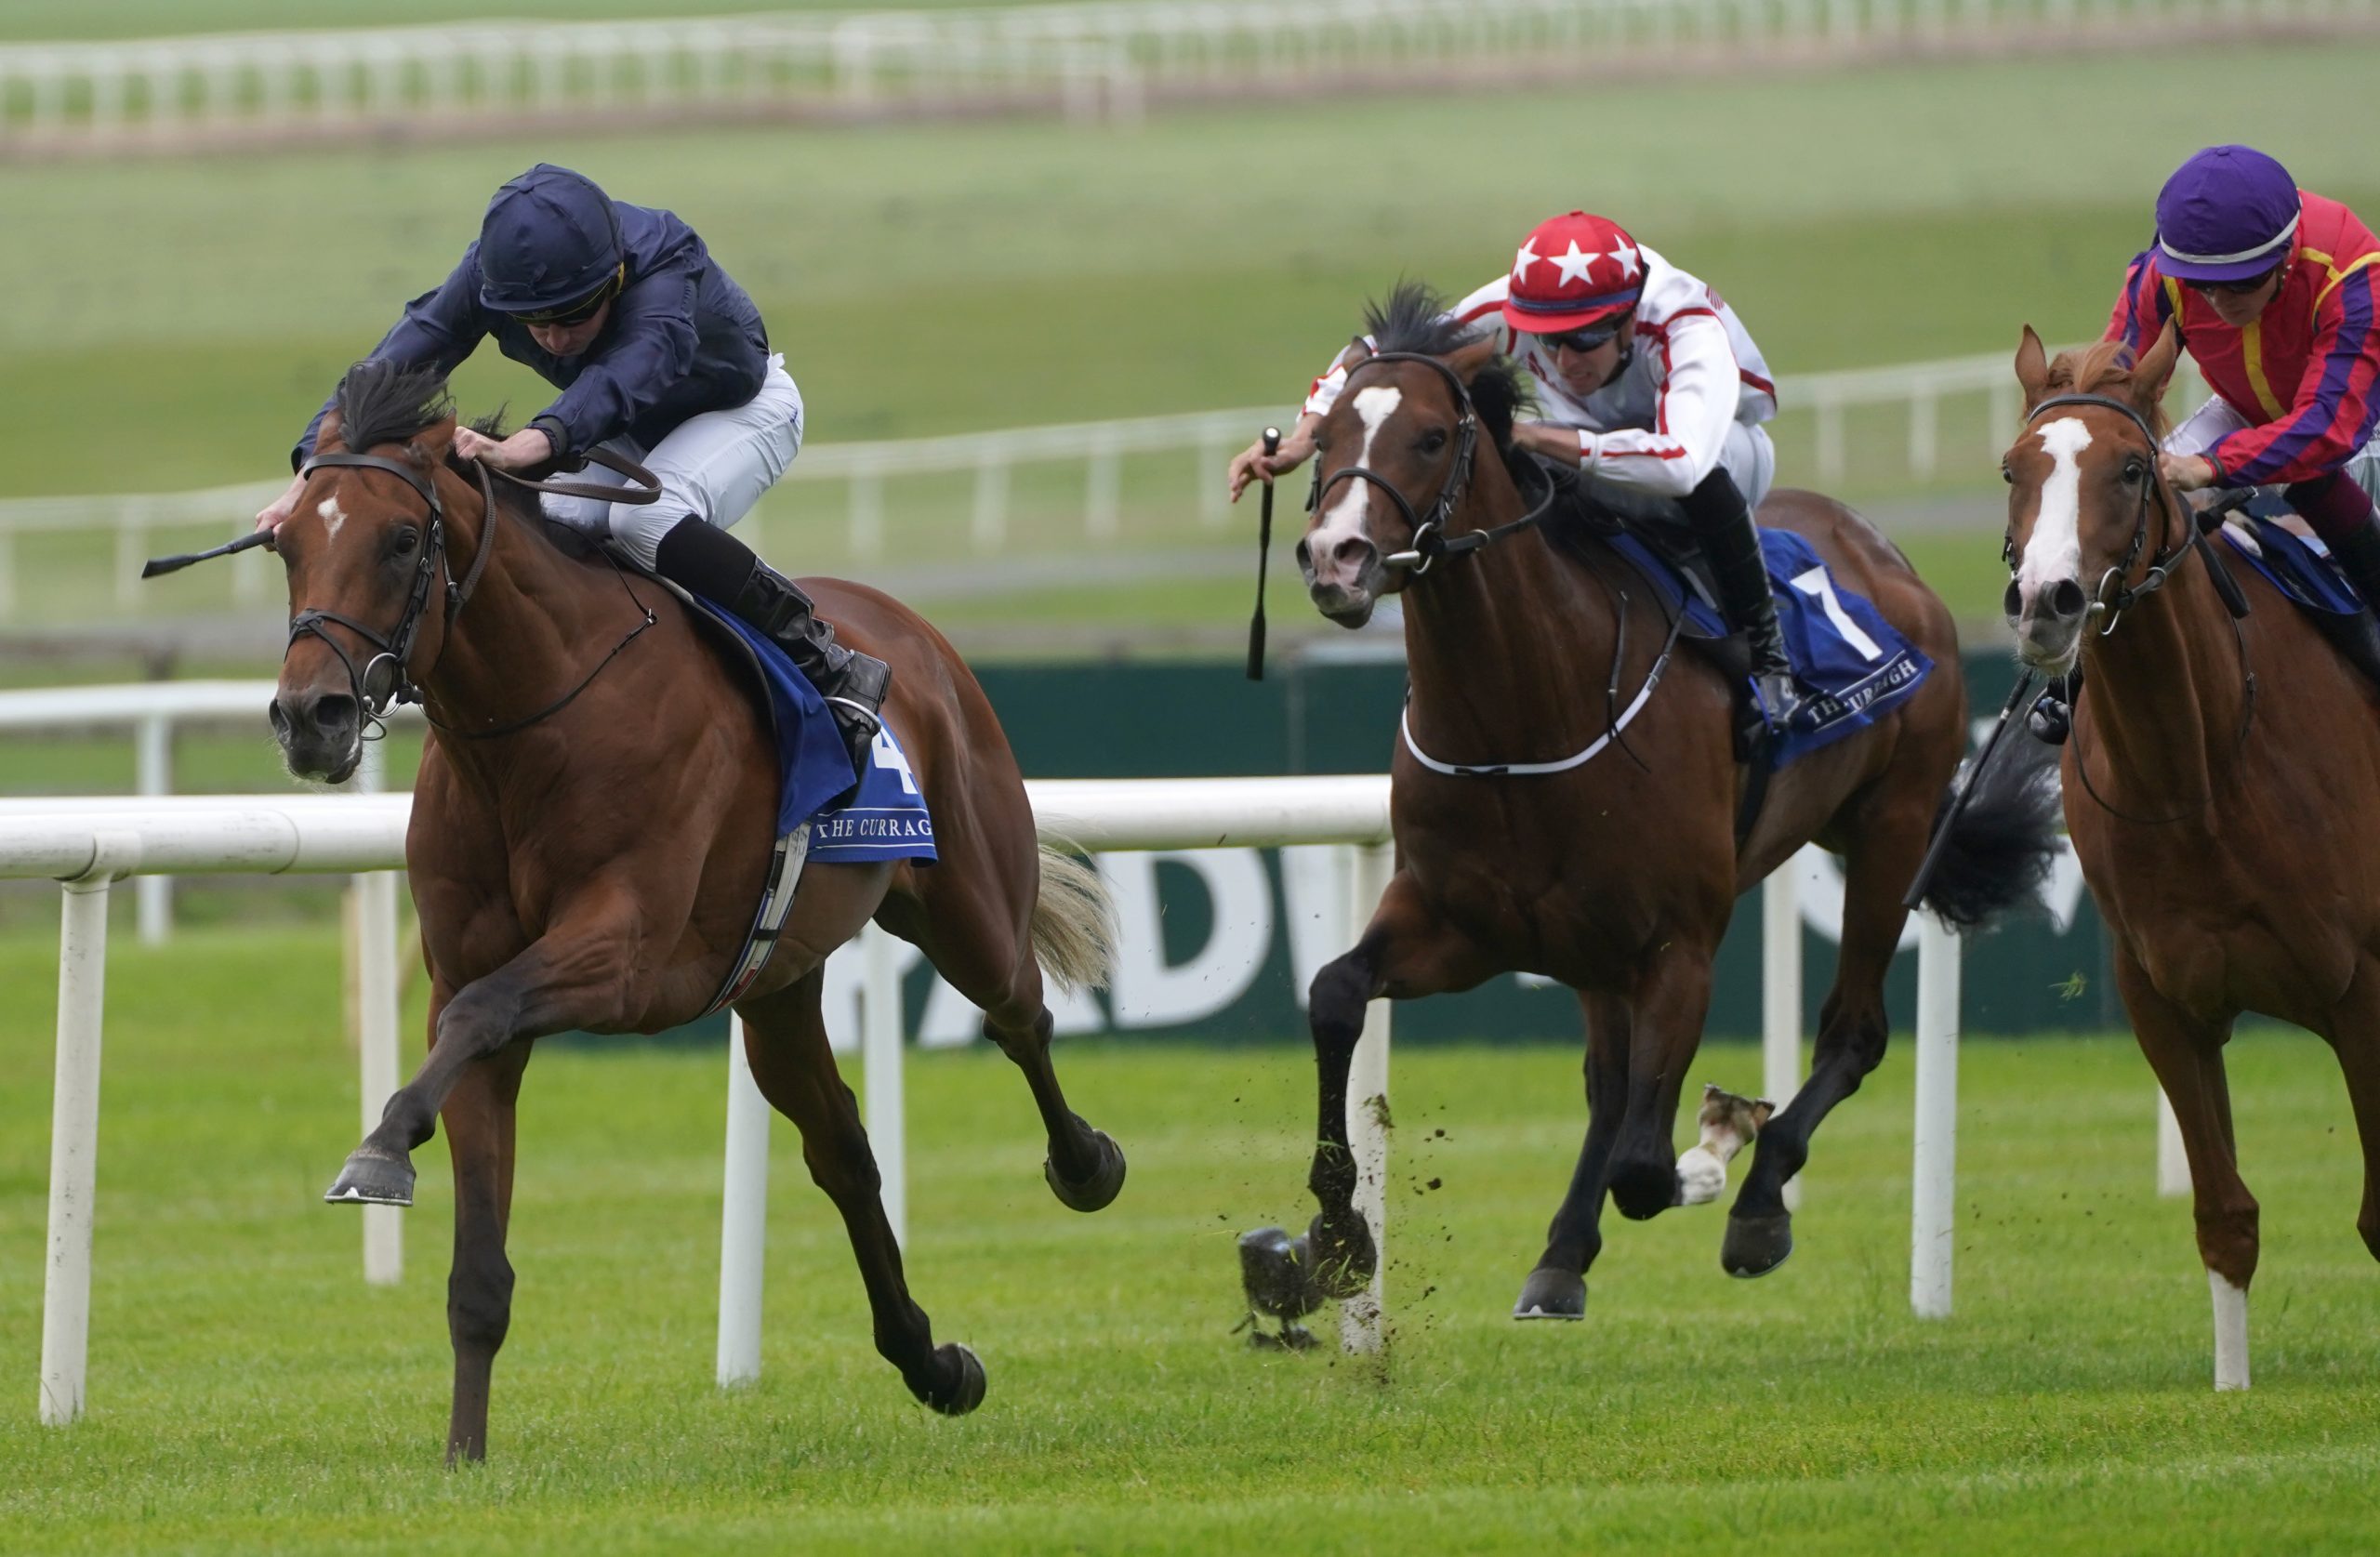 City Of Troy in action - He still remains Ballydoyle's first choice